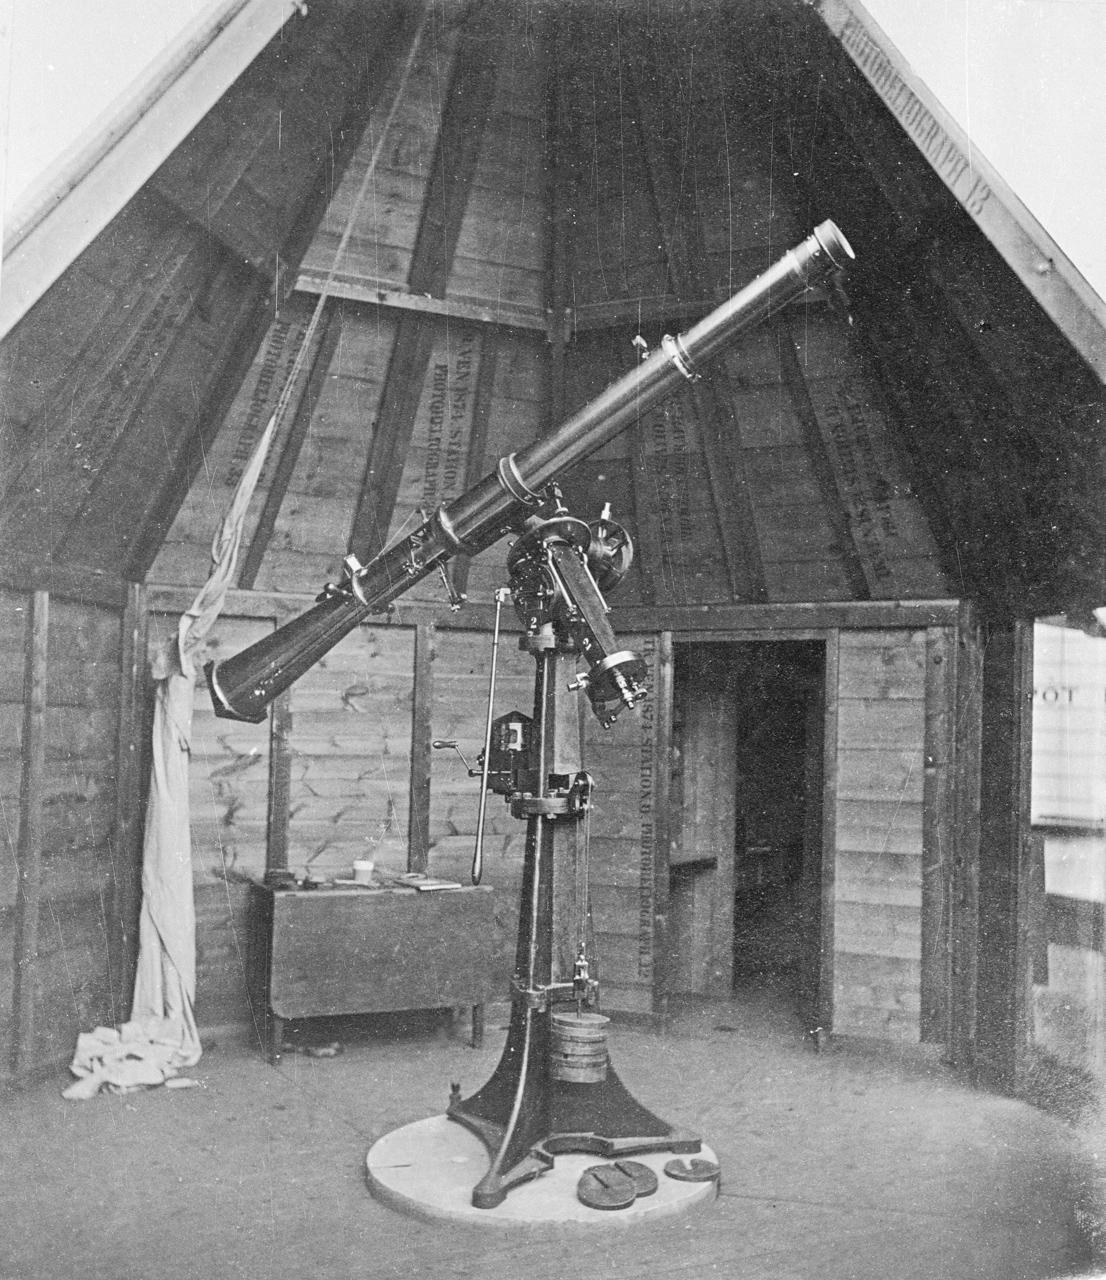 The Dallmeyer photoheliograph, used by Annie Russell to measure sunspots.